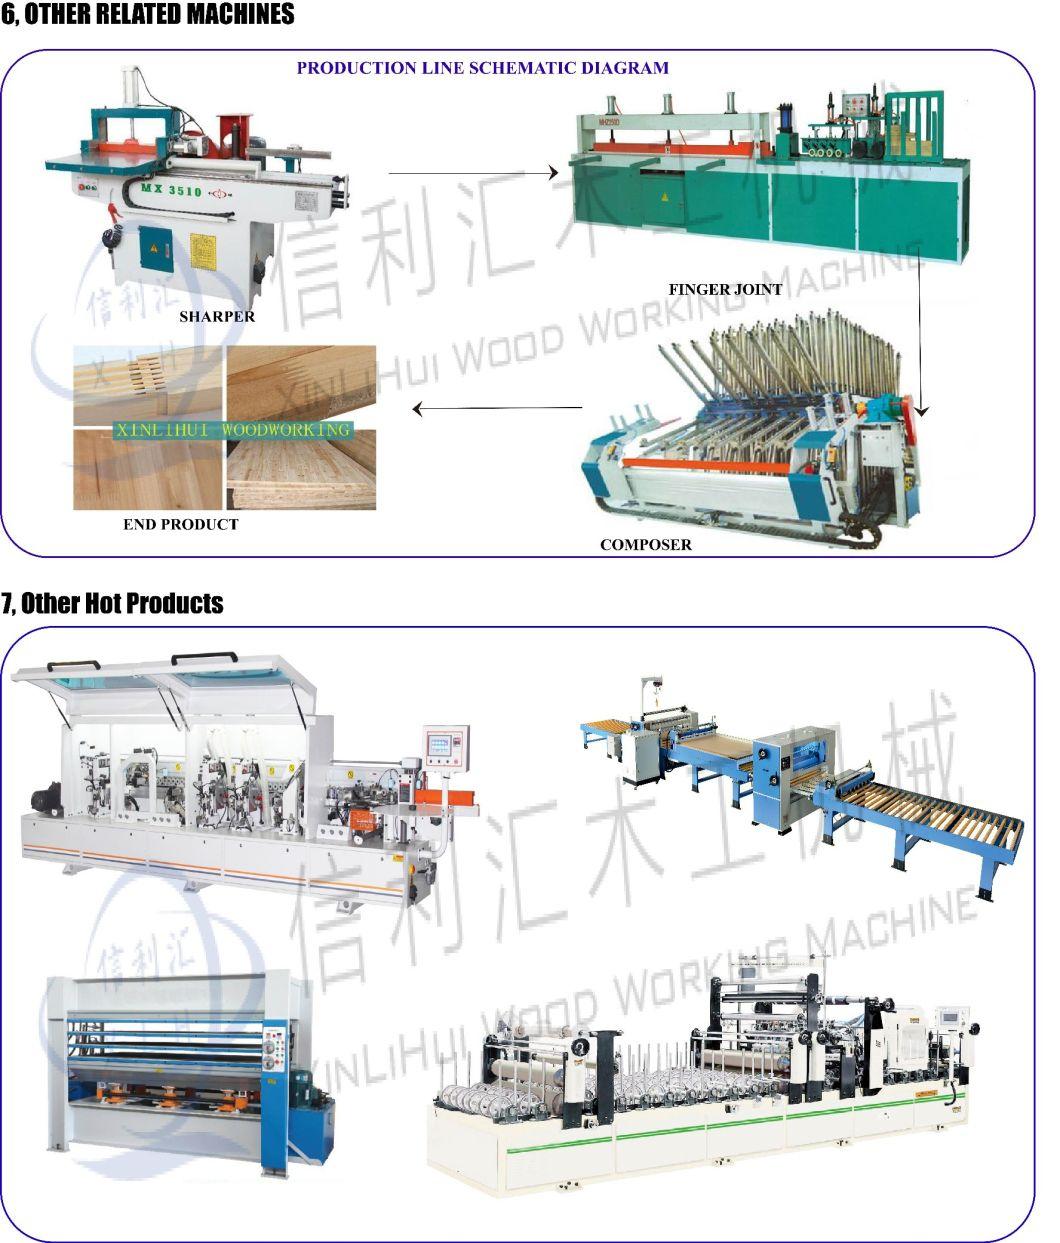 Complete Project Starting From Raw Material to The Final Product, Broom Making Machines (4 Axis Broom Making Machine Also Used for Wooden Education Toys